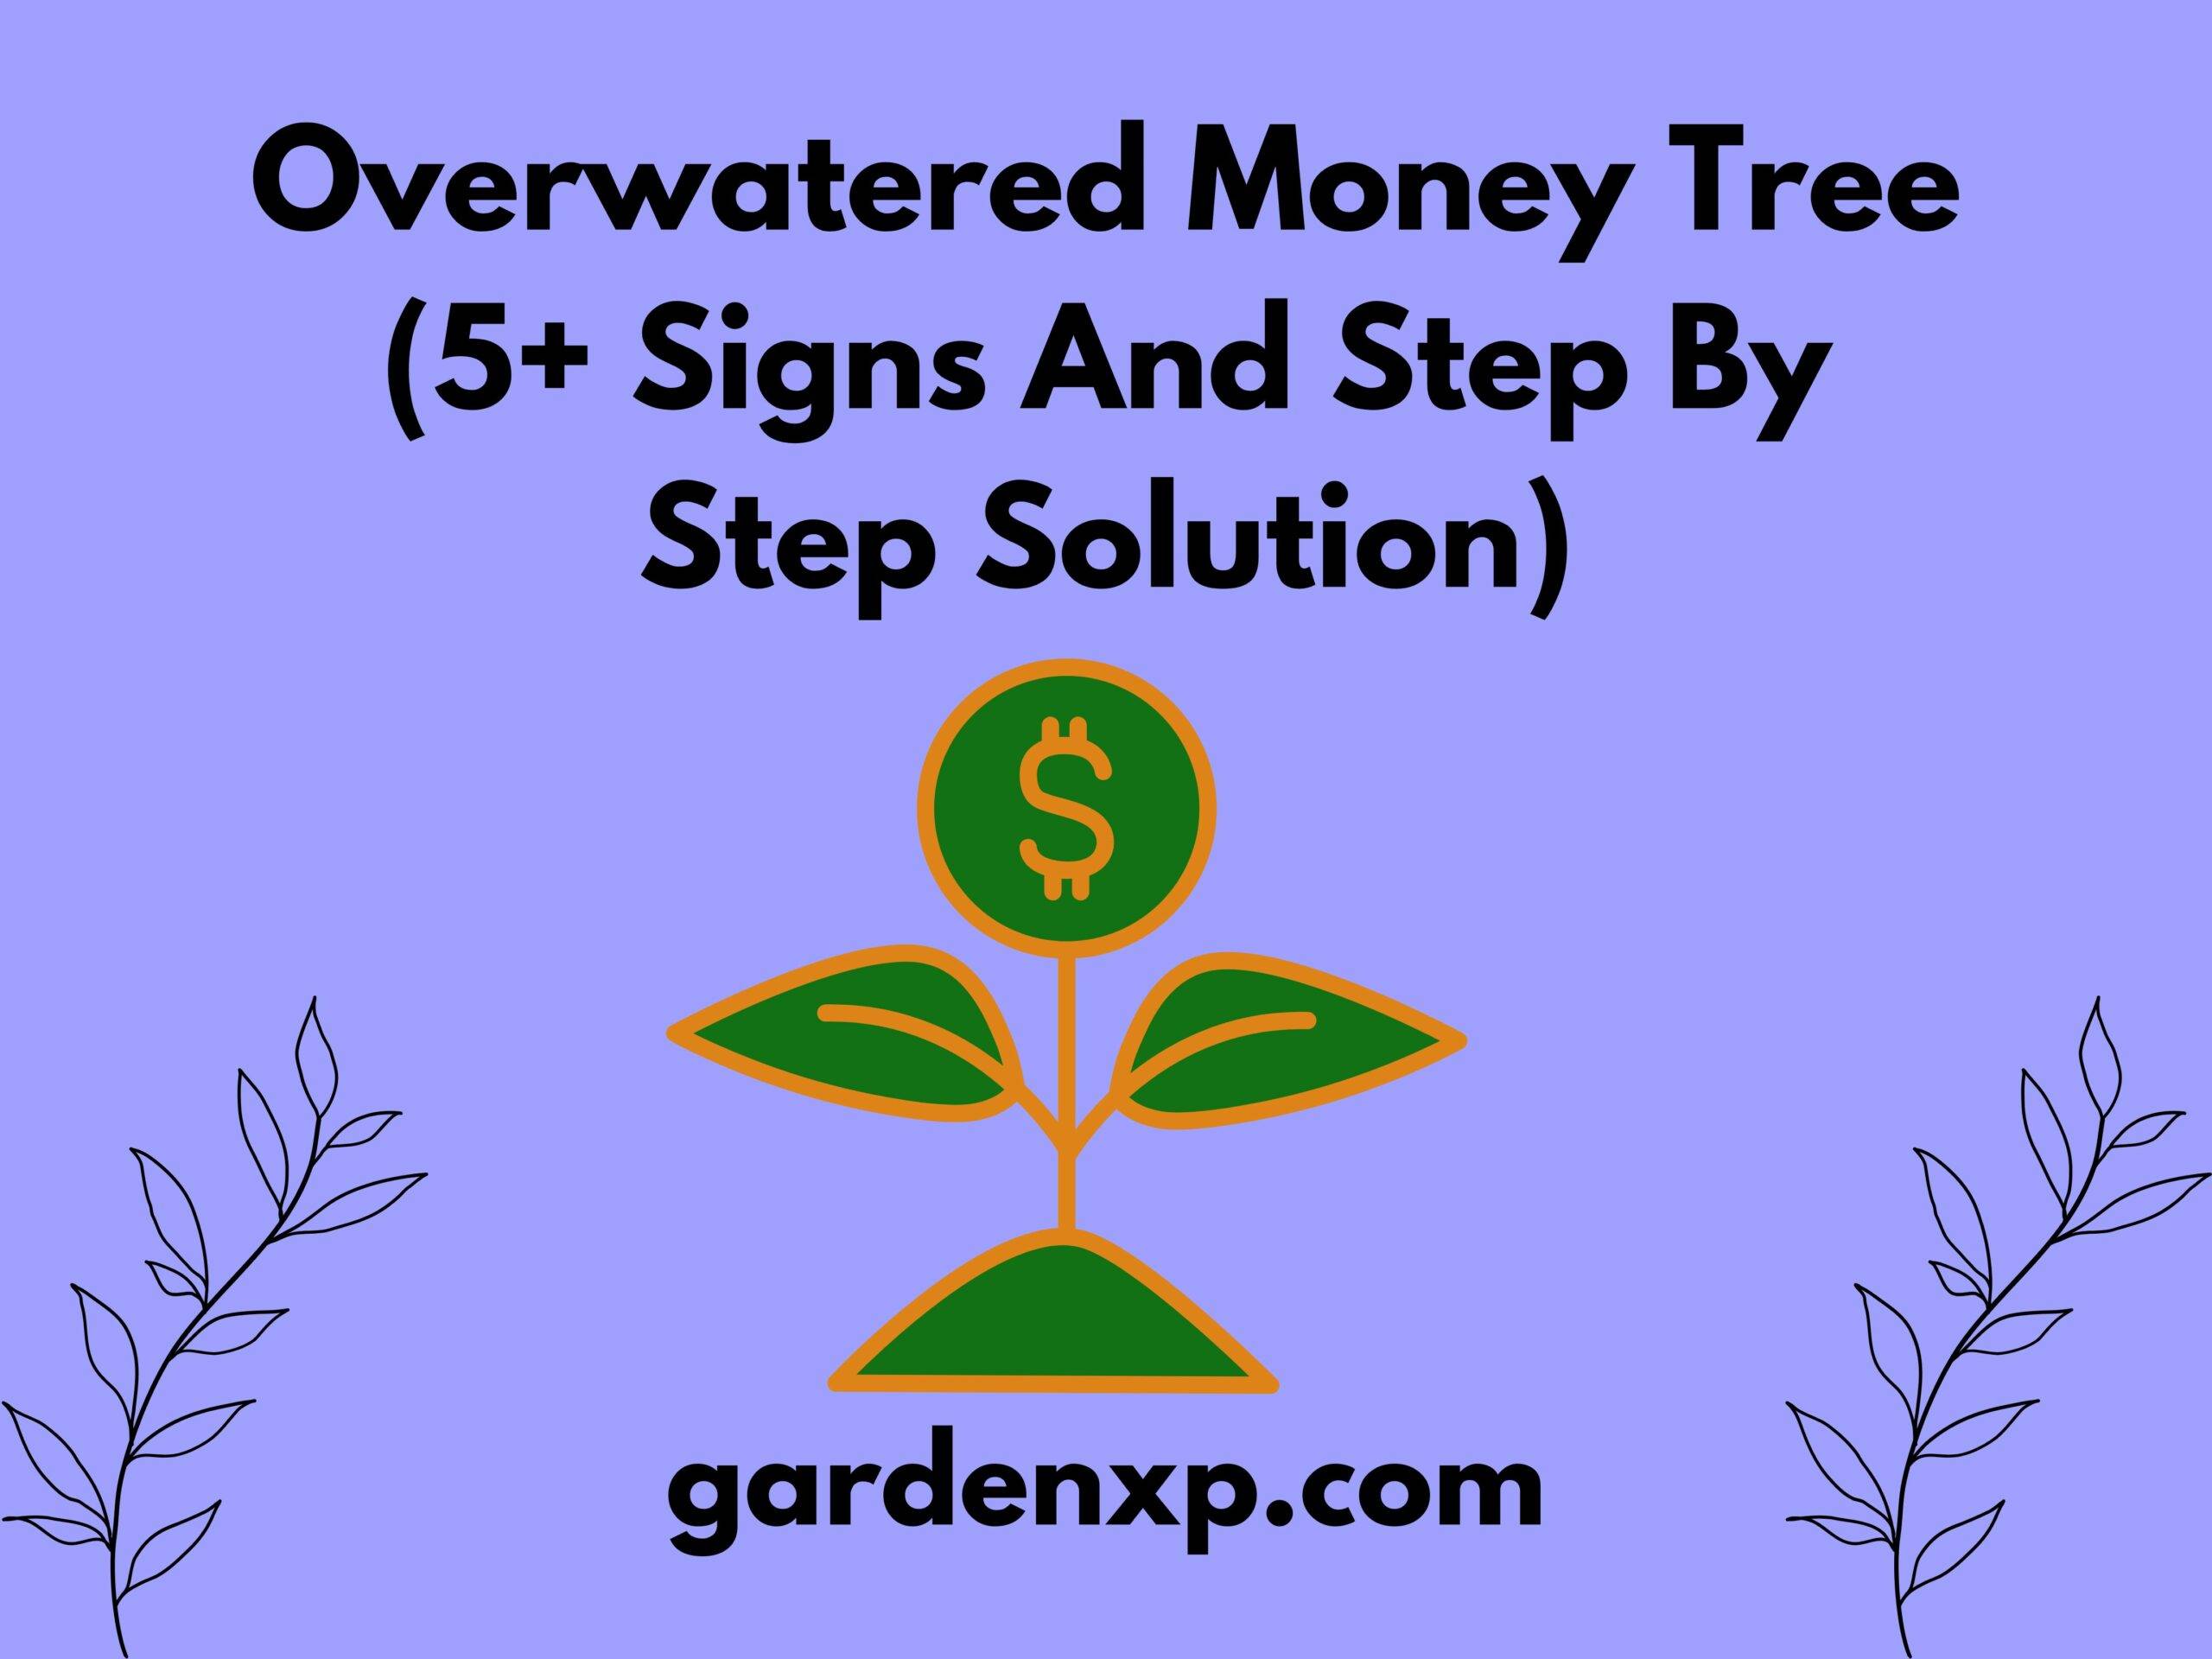 Overwatered Money Tree (5+ Signs And Step By Step Solution)